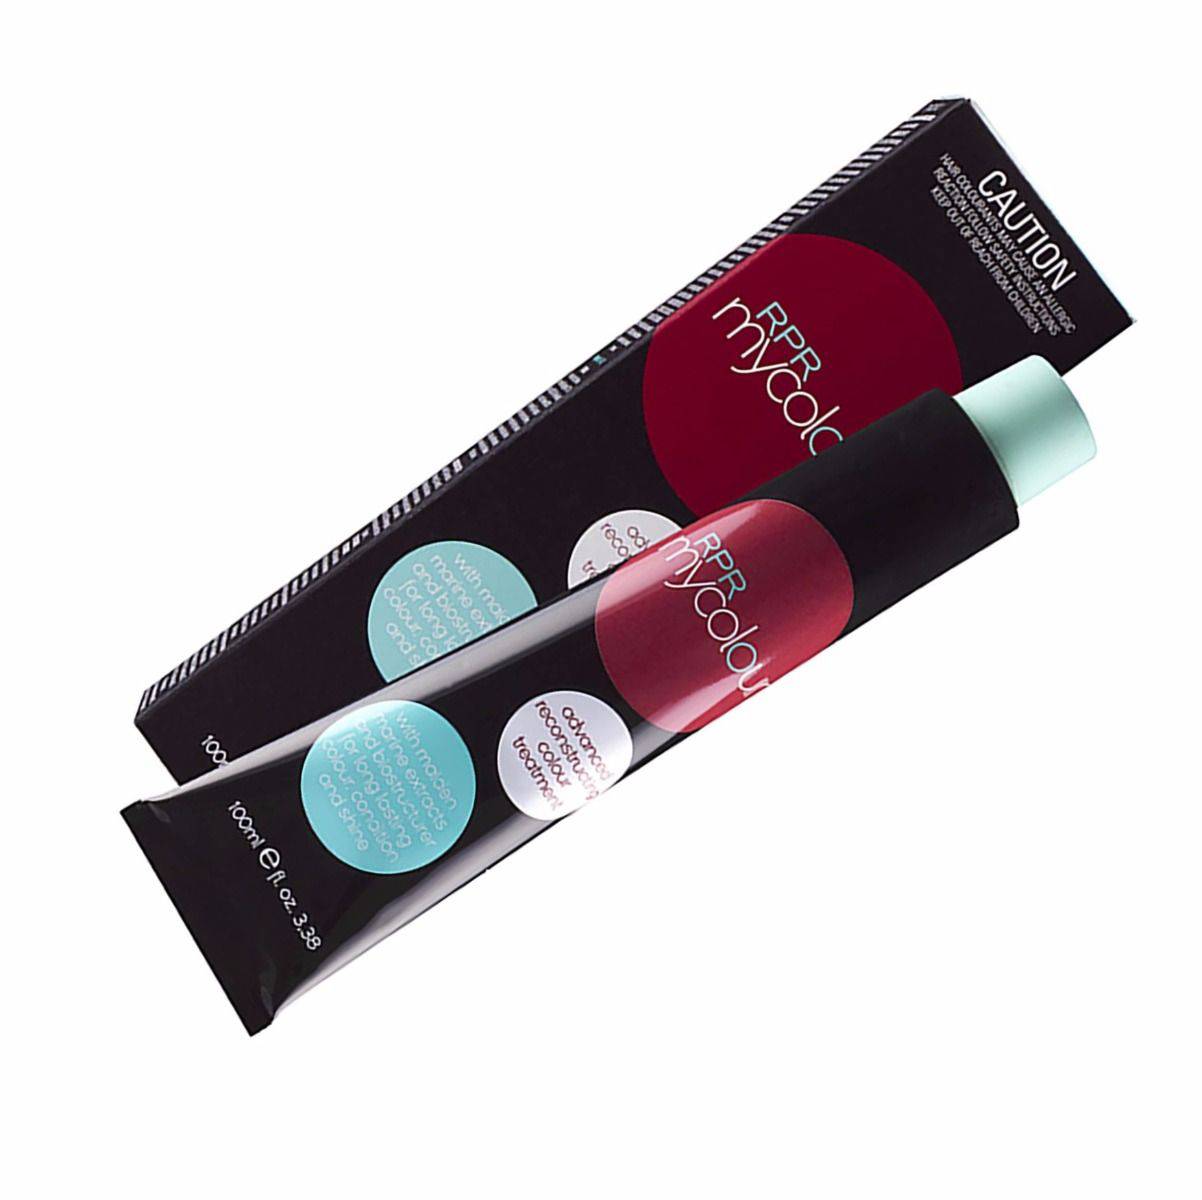 RPR My Colour 5.6 Level 5 Red 100g tube Mix 1:1.5 - On Line Hair Depot